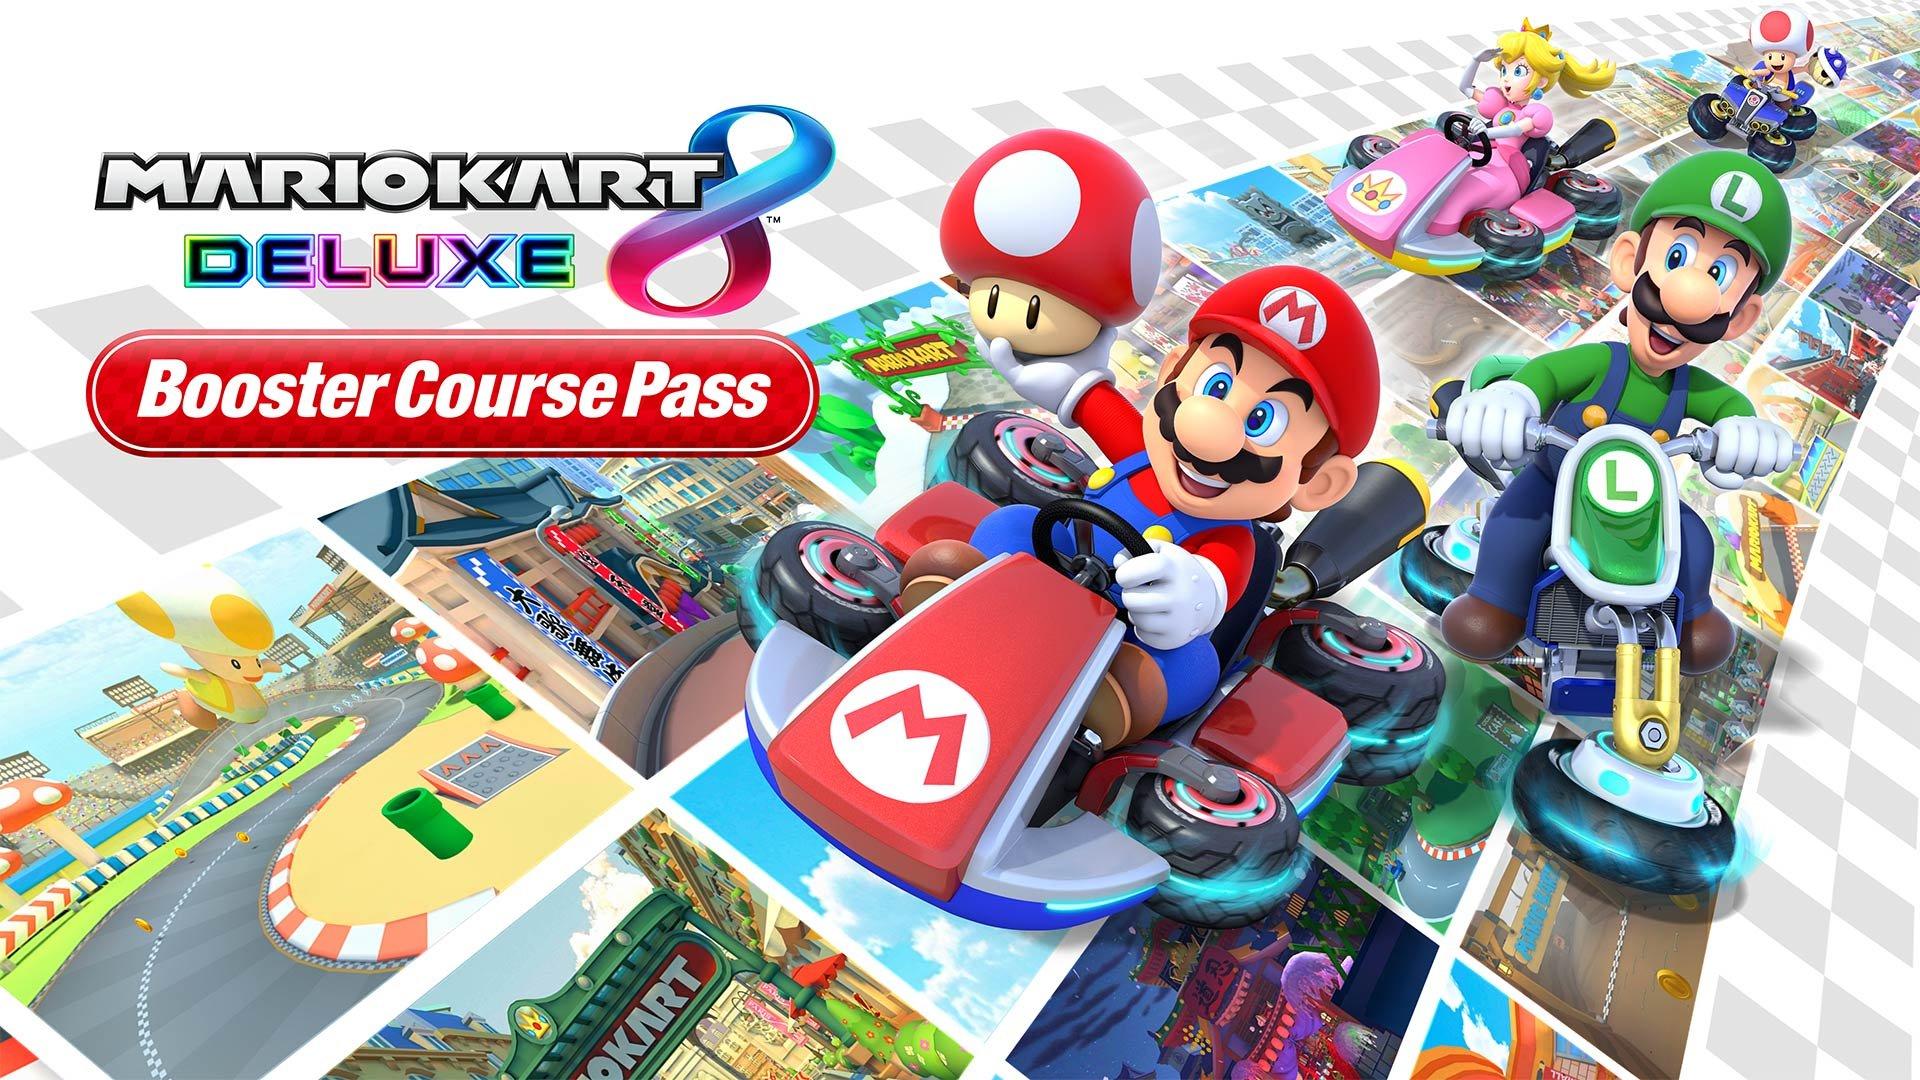 Mario Kart 8 Deluxe DLC – All You Need To Know